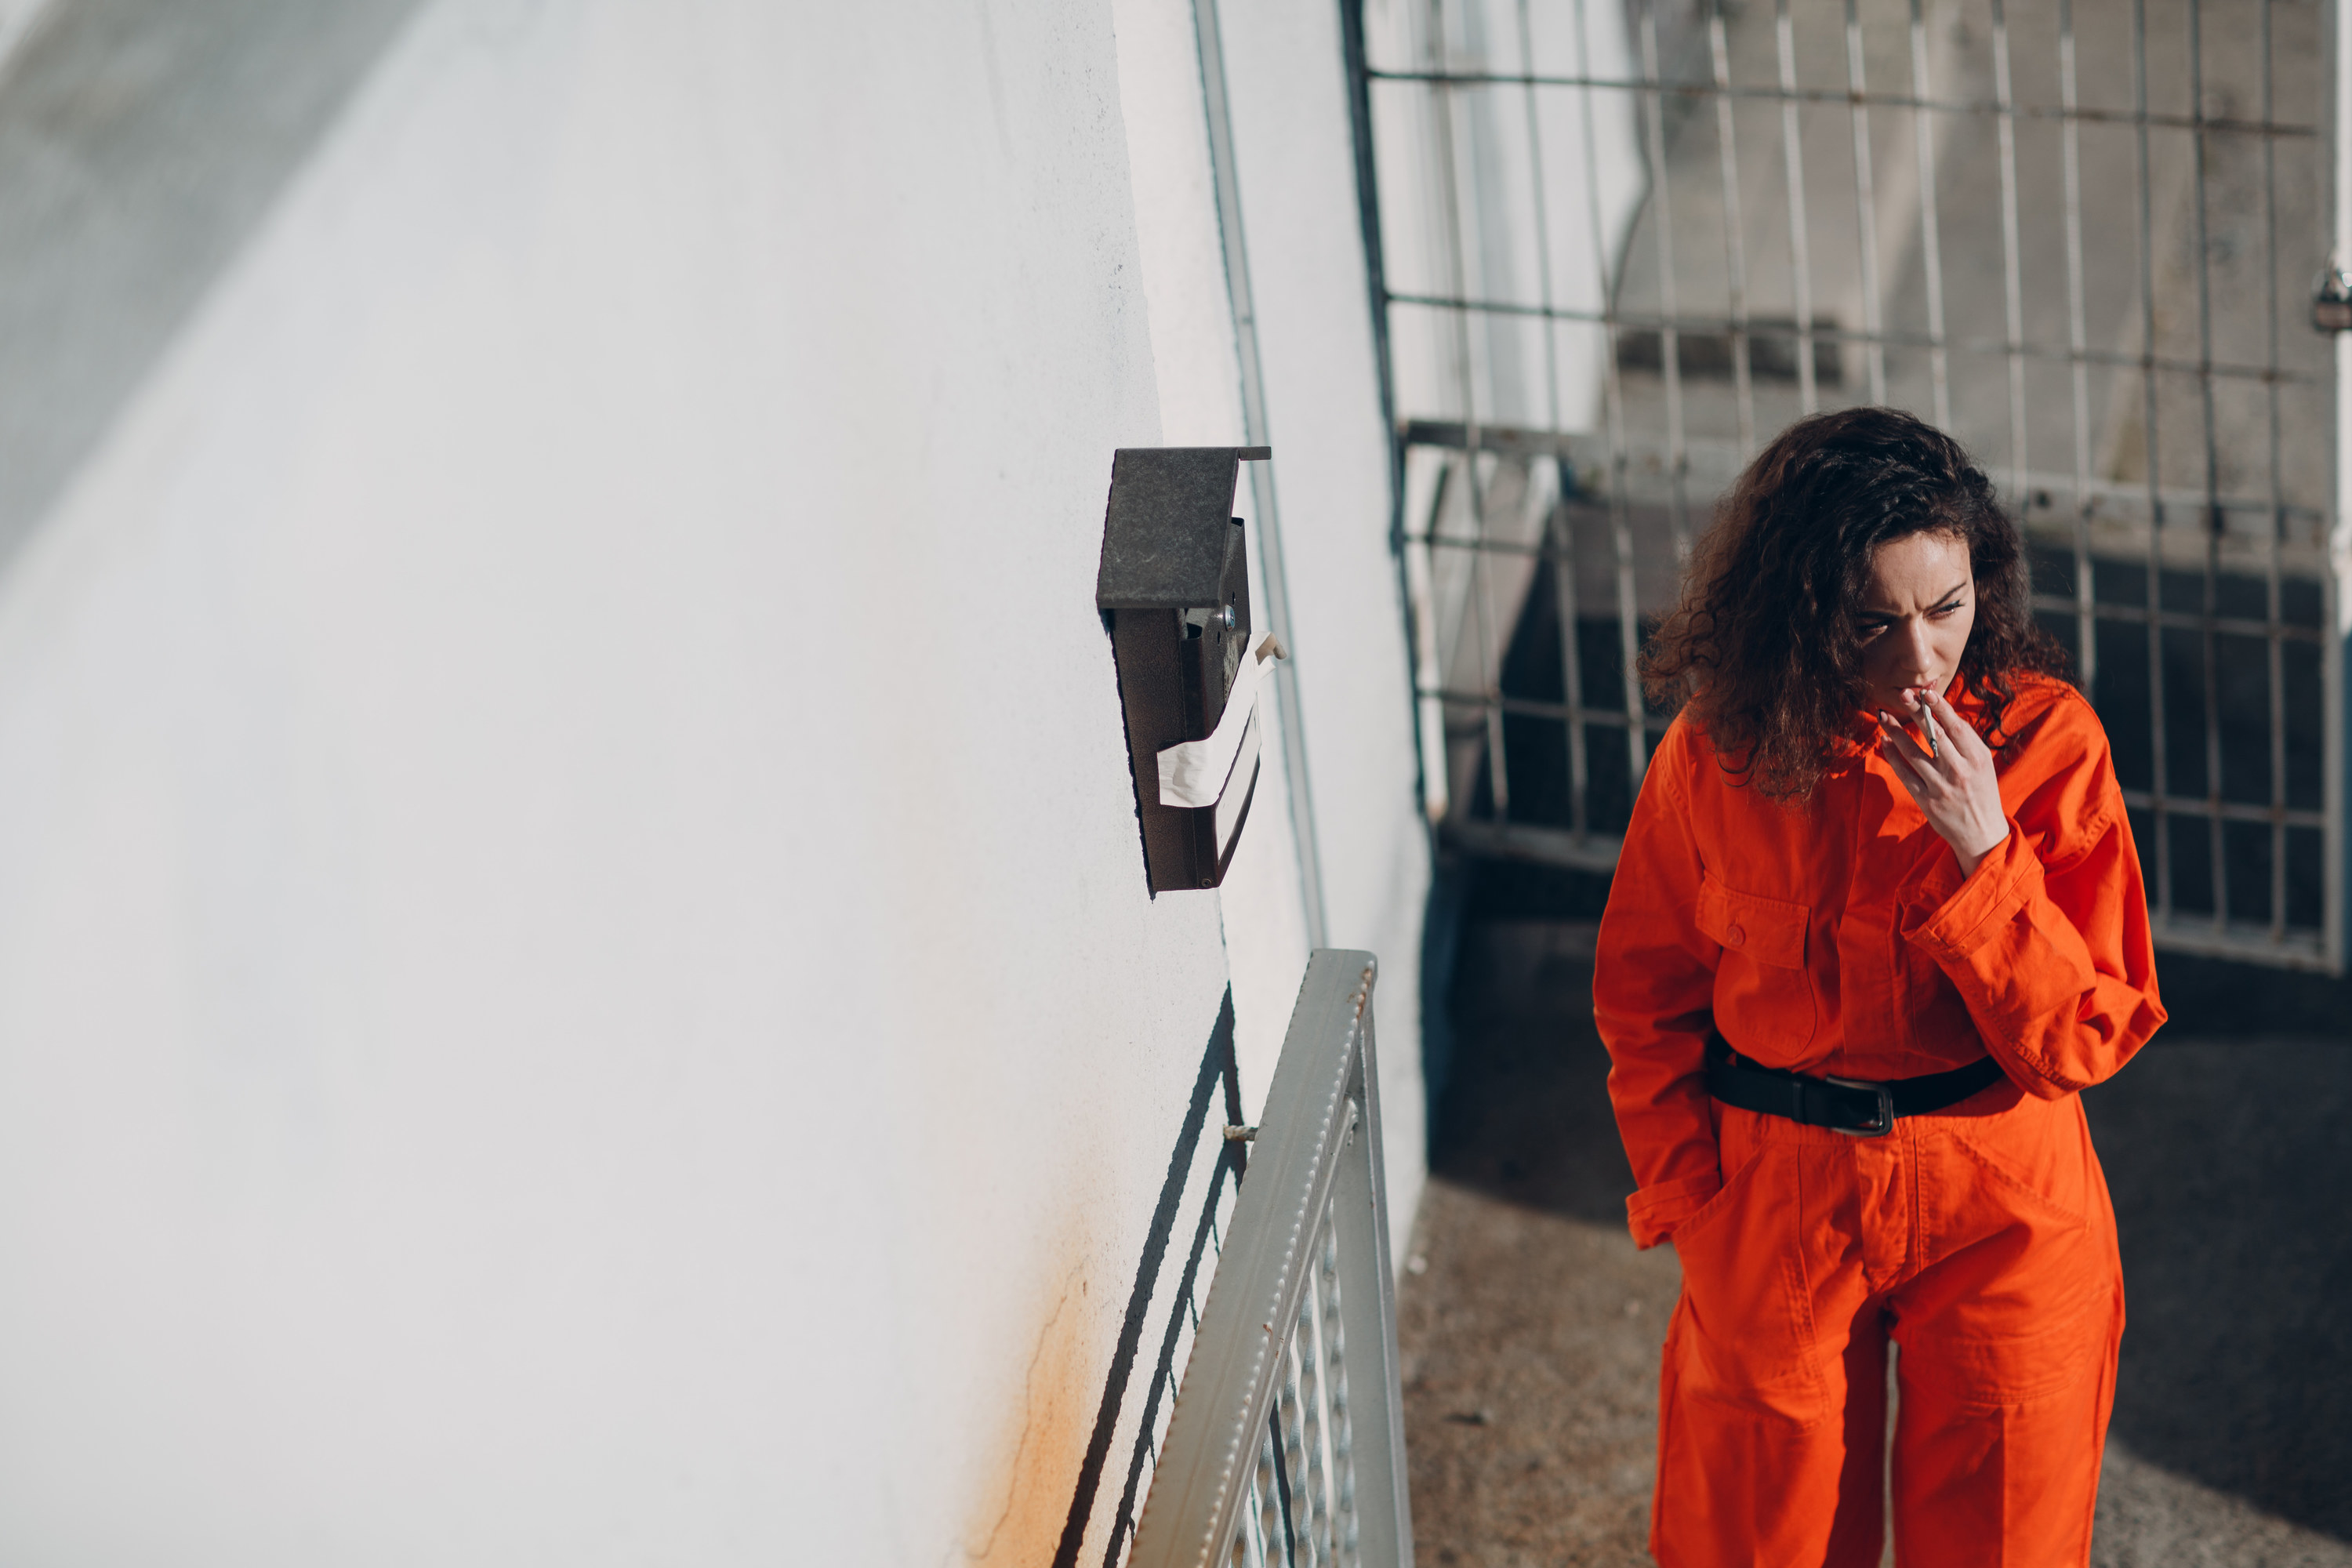 Woman wearing an orange prison jumpsuit stands by a phone